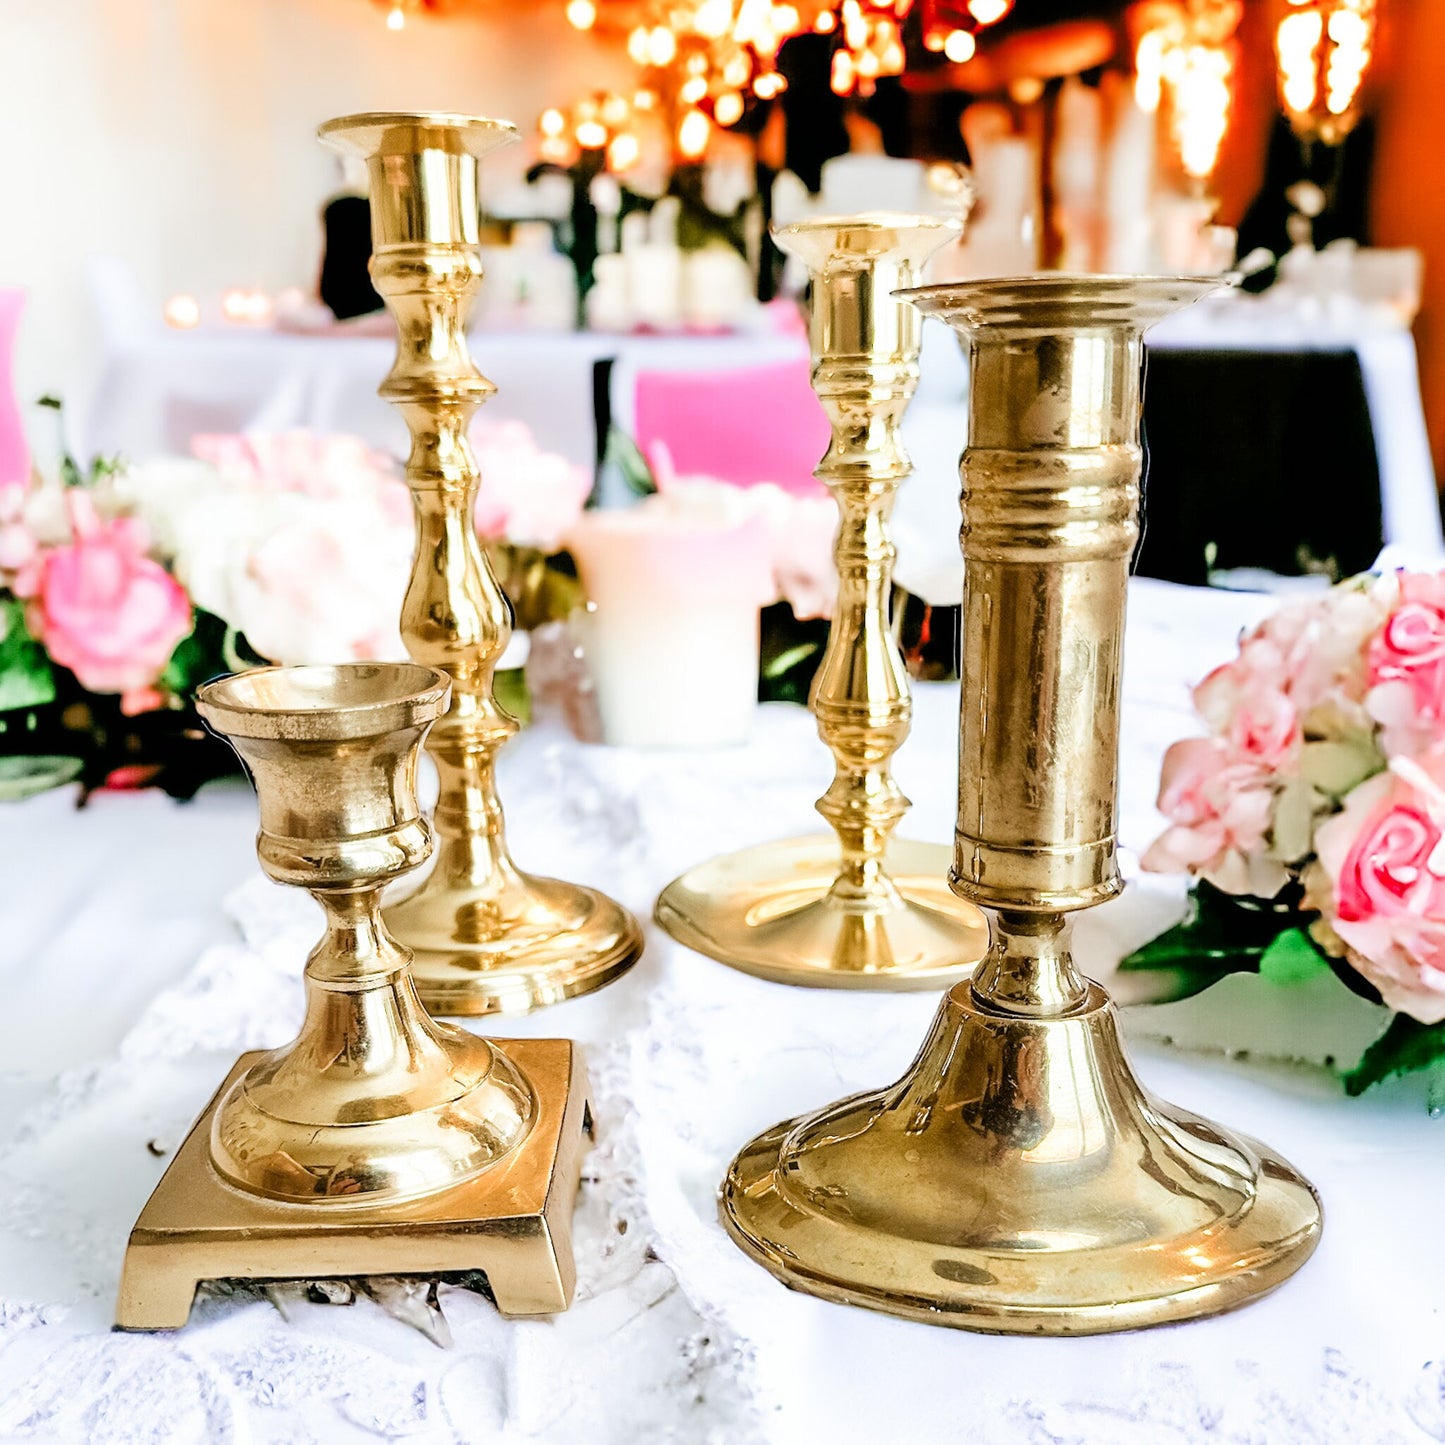 Vintage Brass Candle Holders, Candlesticks, Wedding Gift, Best Friend Gifts